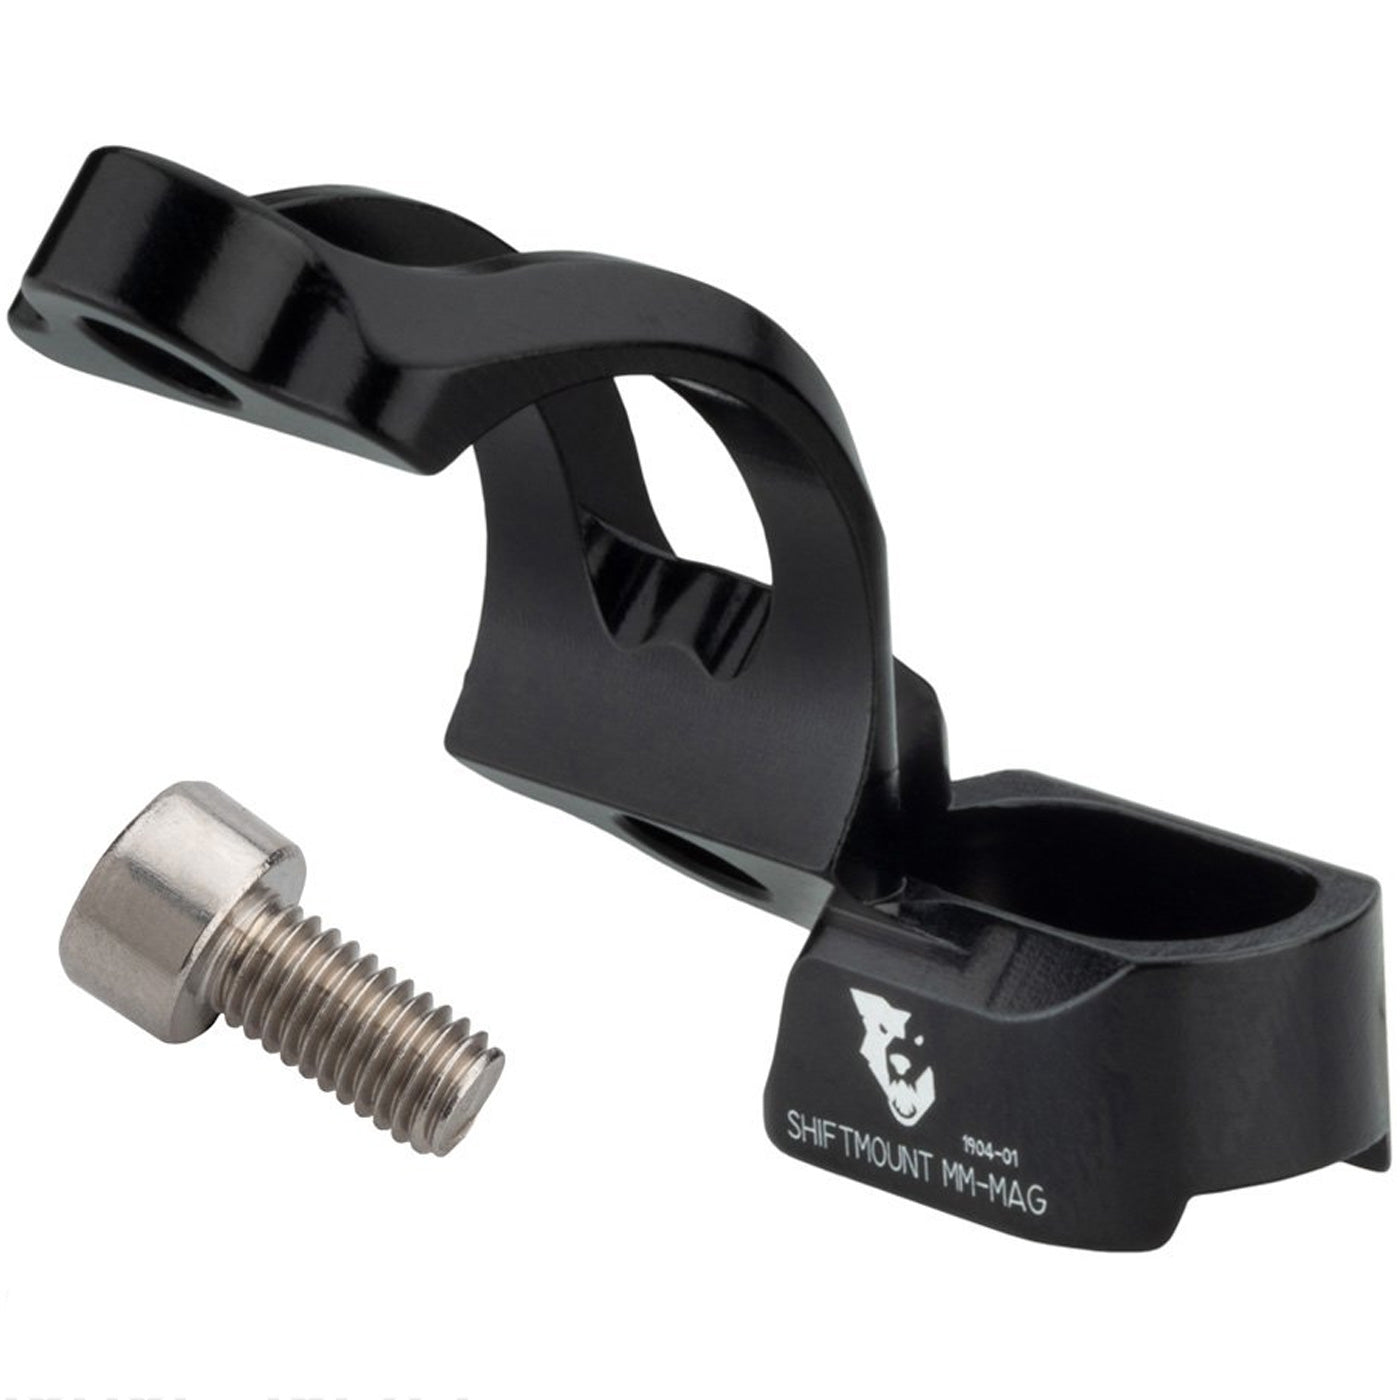 WolfTooth Shiftmount Brake Lever Adapter - MM-MAG